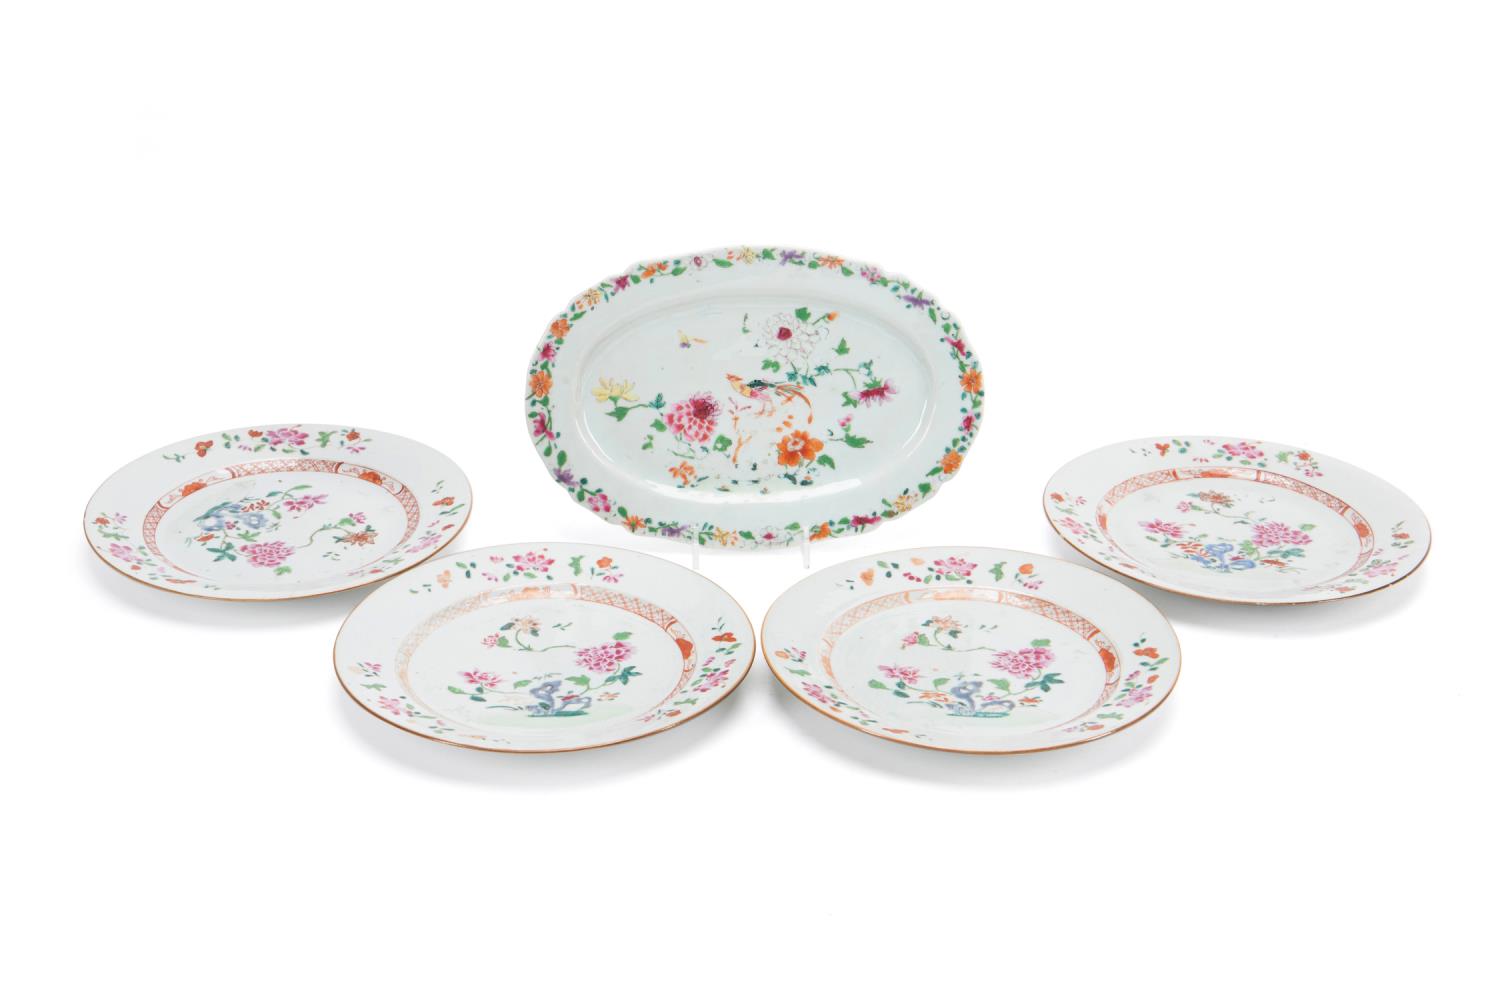 FIVE PIECES FAMILLE ROSE CHINESE EXPORT